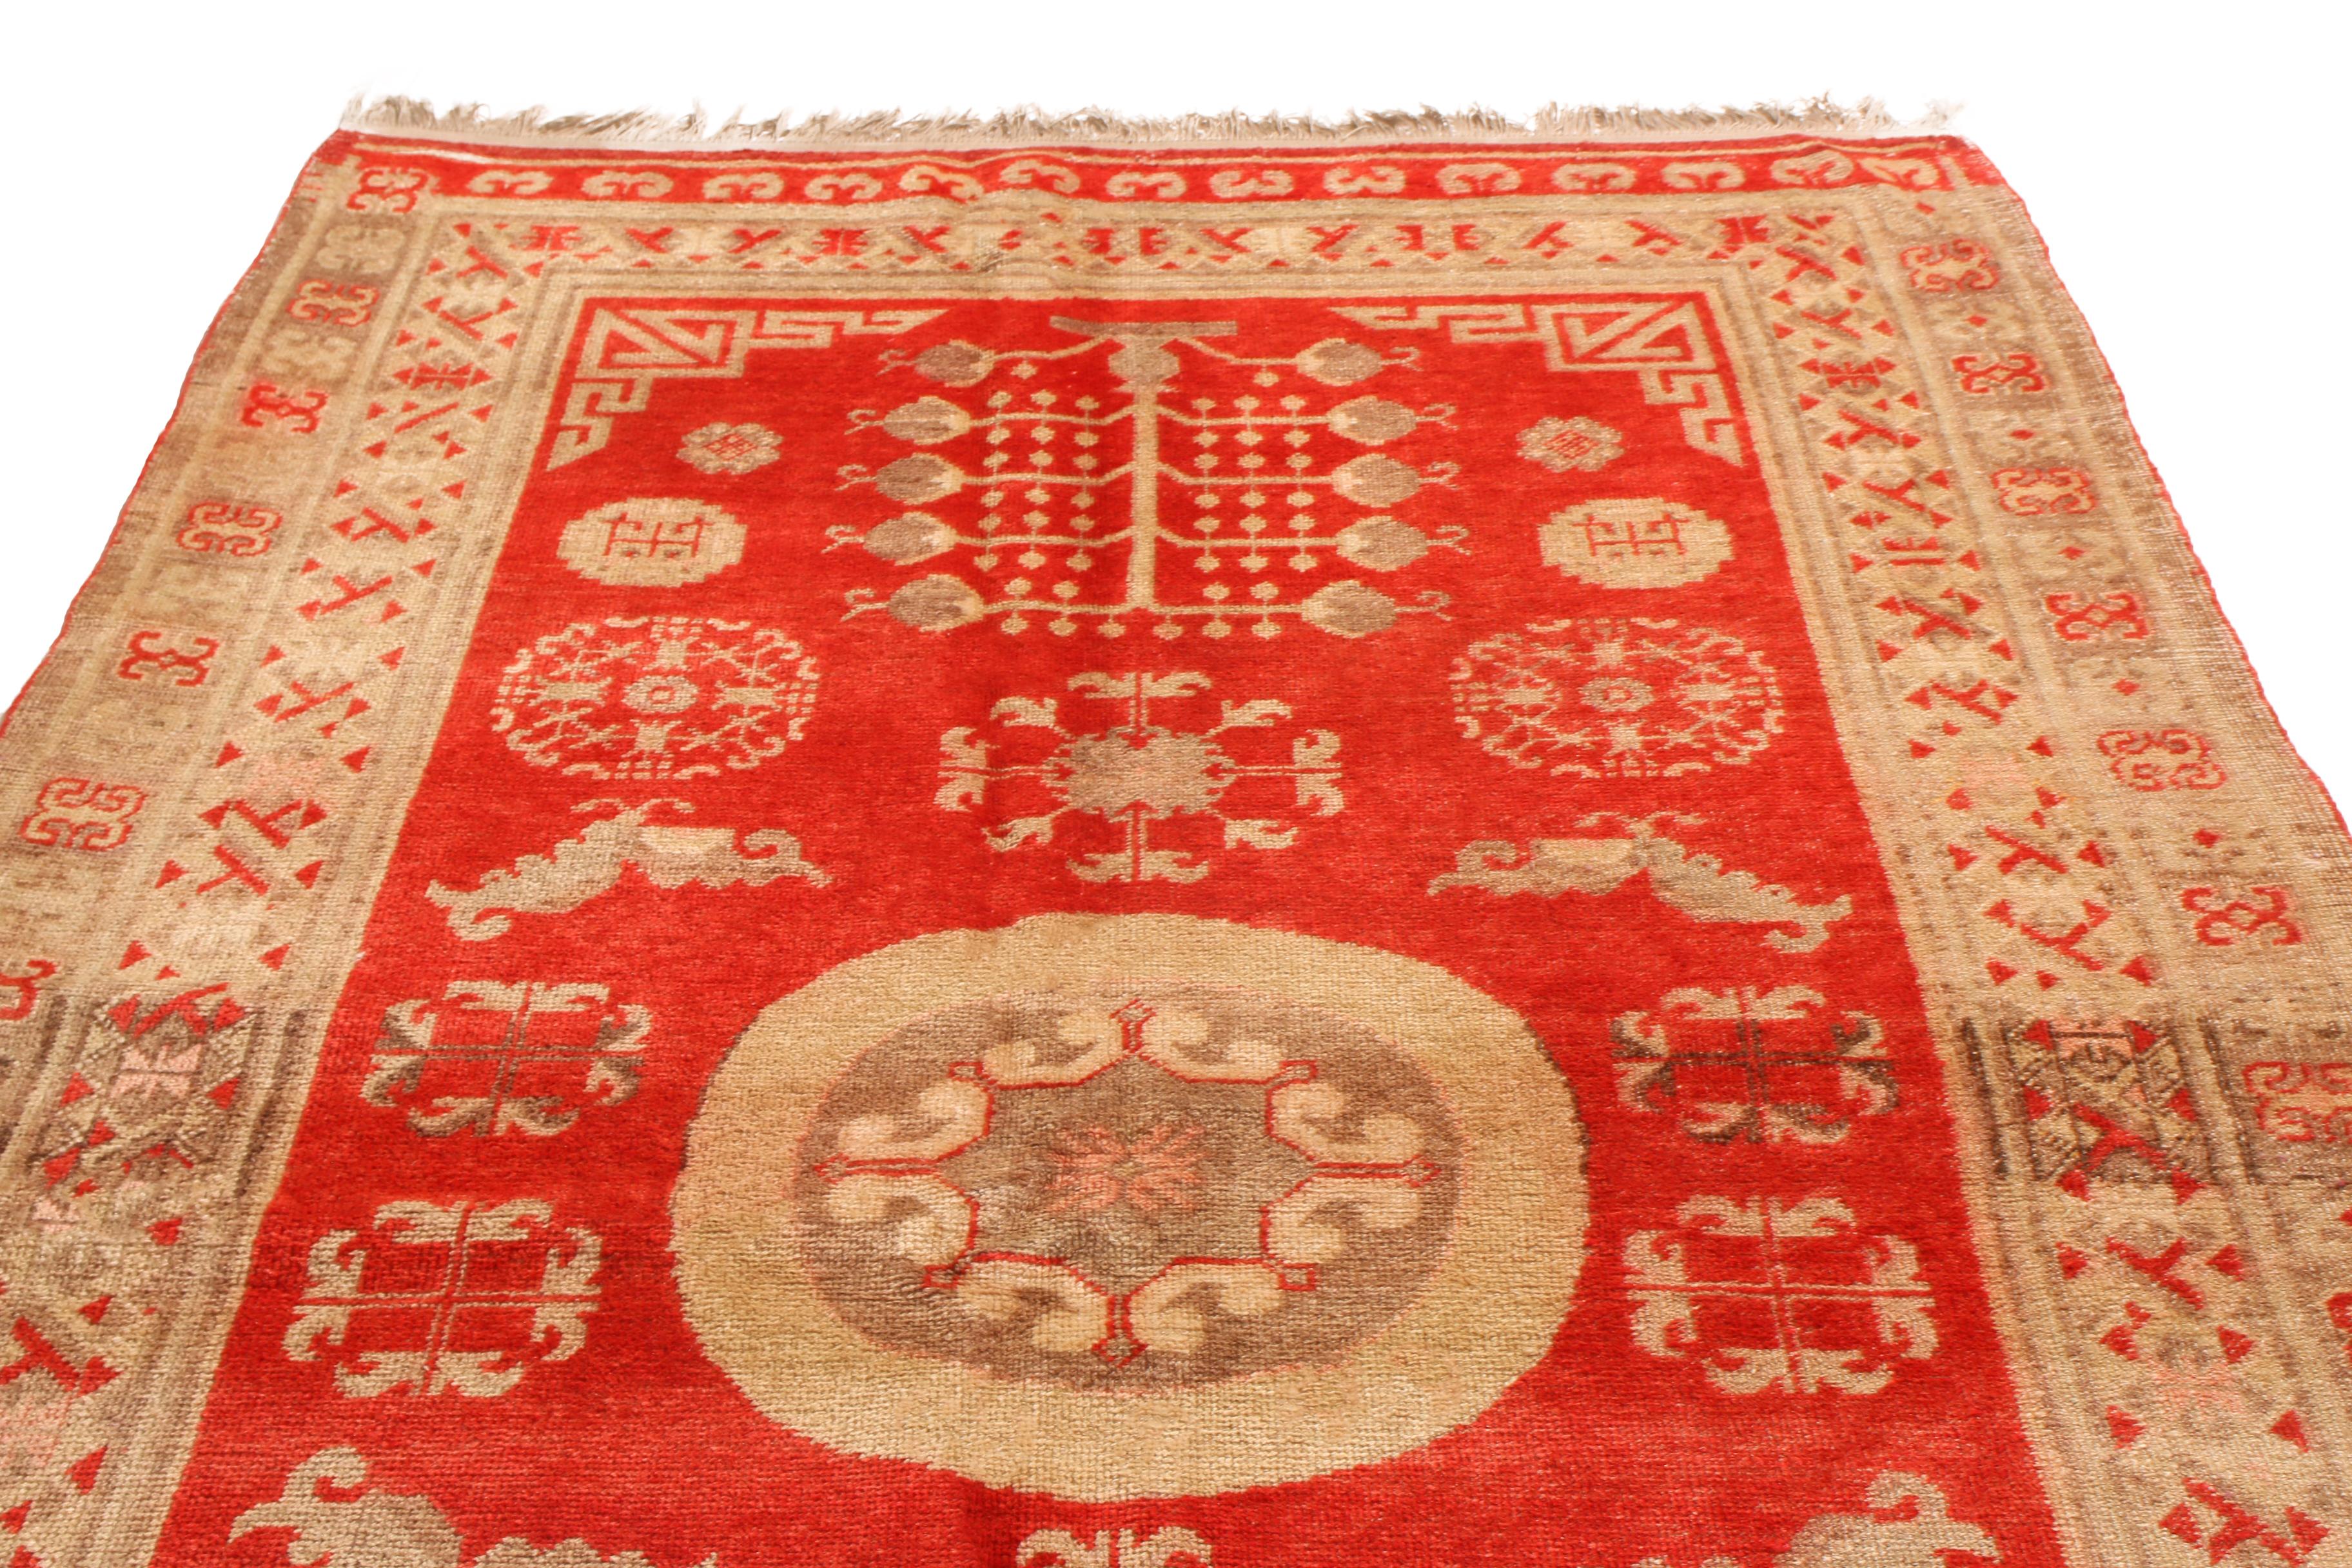 Originating from East Turkestan between 1920-1940, this antique transitional Khotan rug from Rug & Kilim has a medallion-style field design with key cultural imagery from the region. Handwoven in high-quality wool, the medallion field design employs